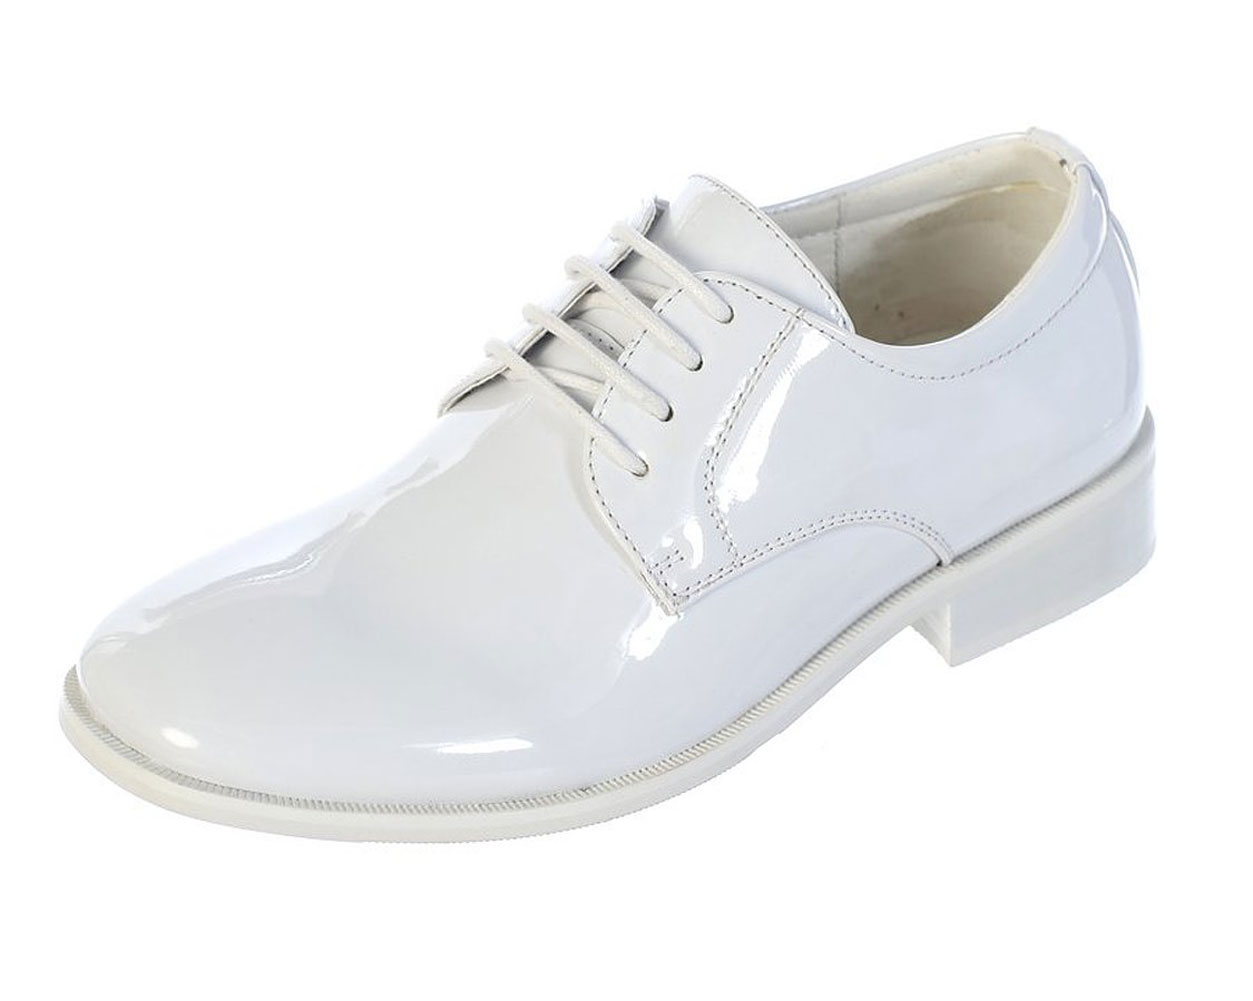 Avery Hill Boys Shiny or Shiny Patent Leather Shoes Wh Shiny Littlekid 9